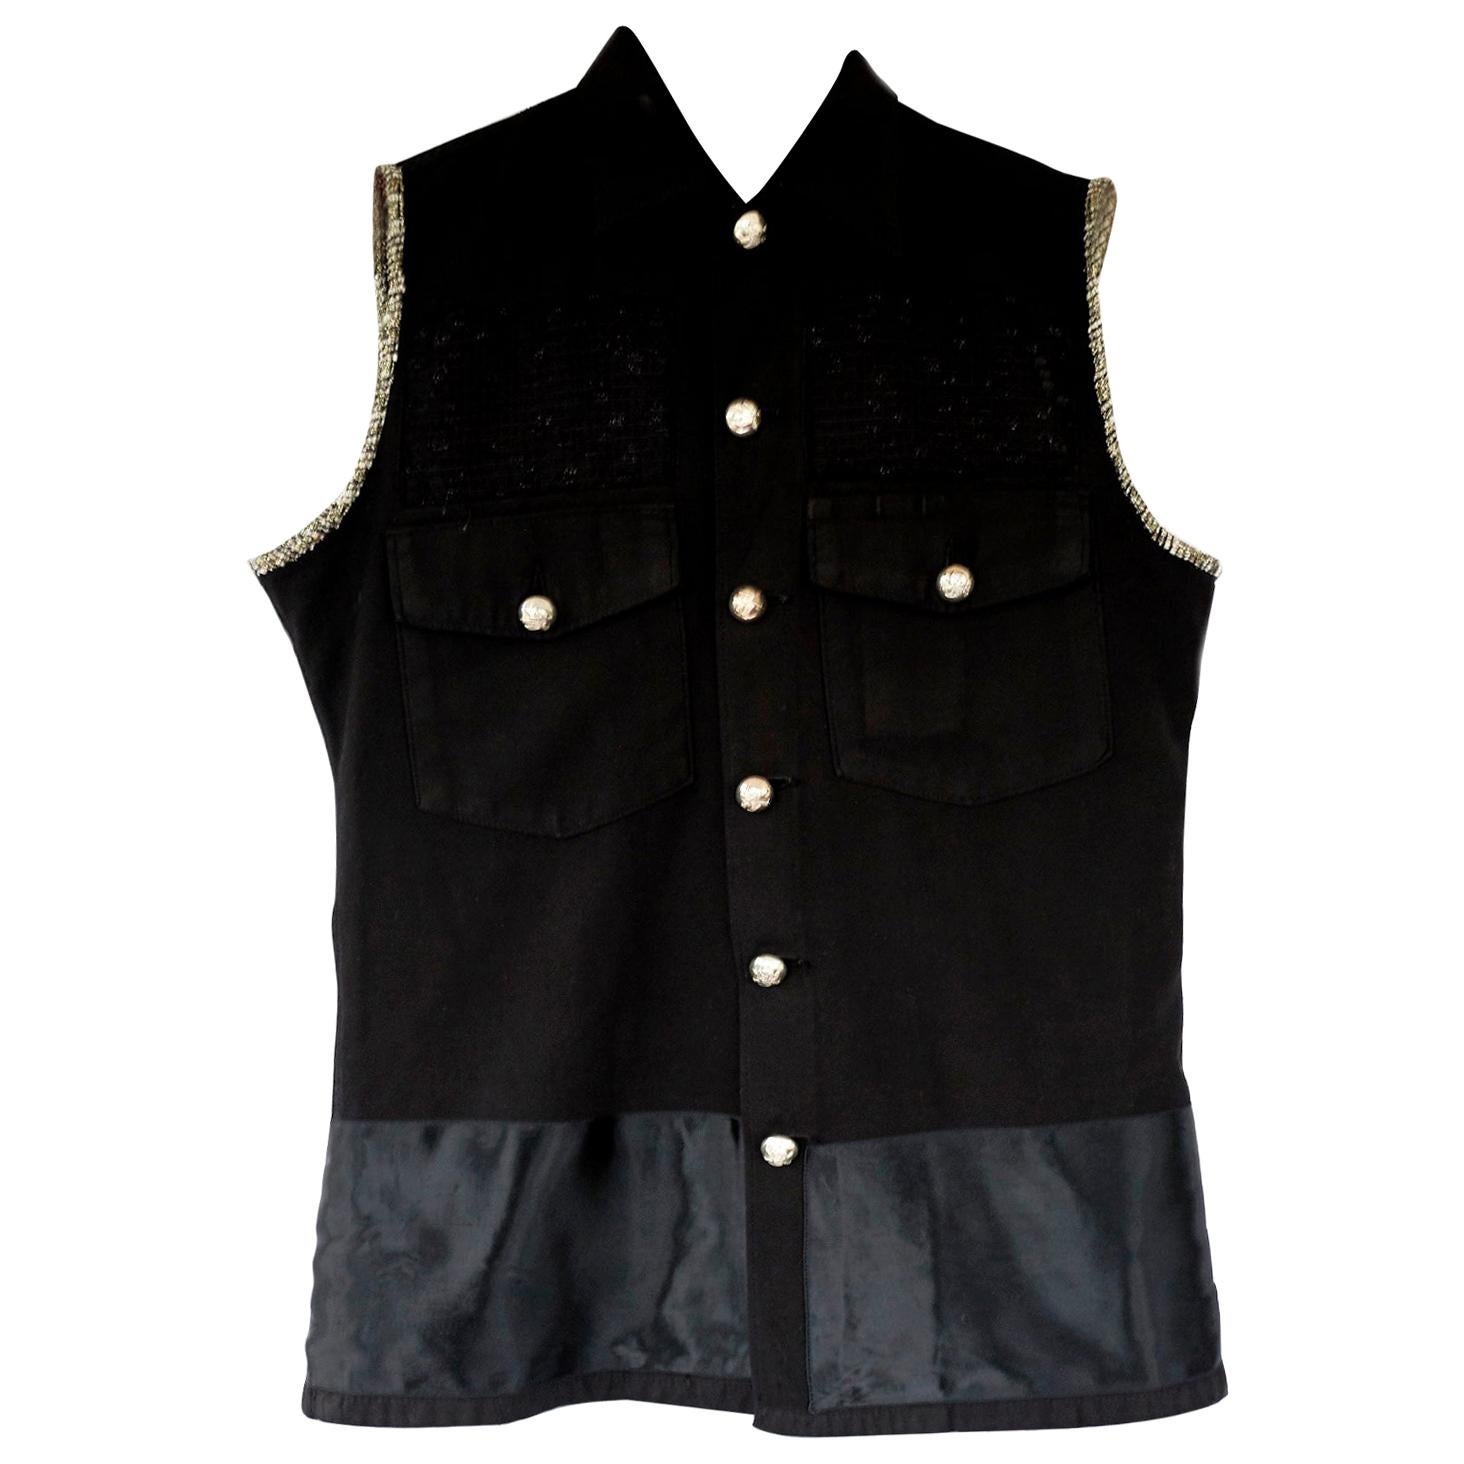 Embellished Sleeveless Jacket vest Military Gold Tweed Silver Button J Dauphin For Sale